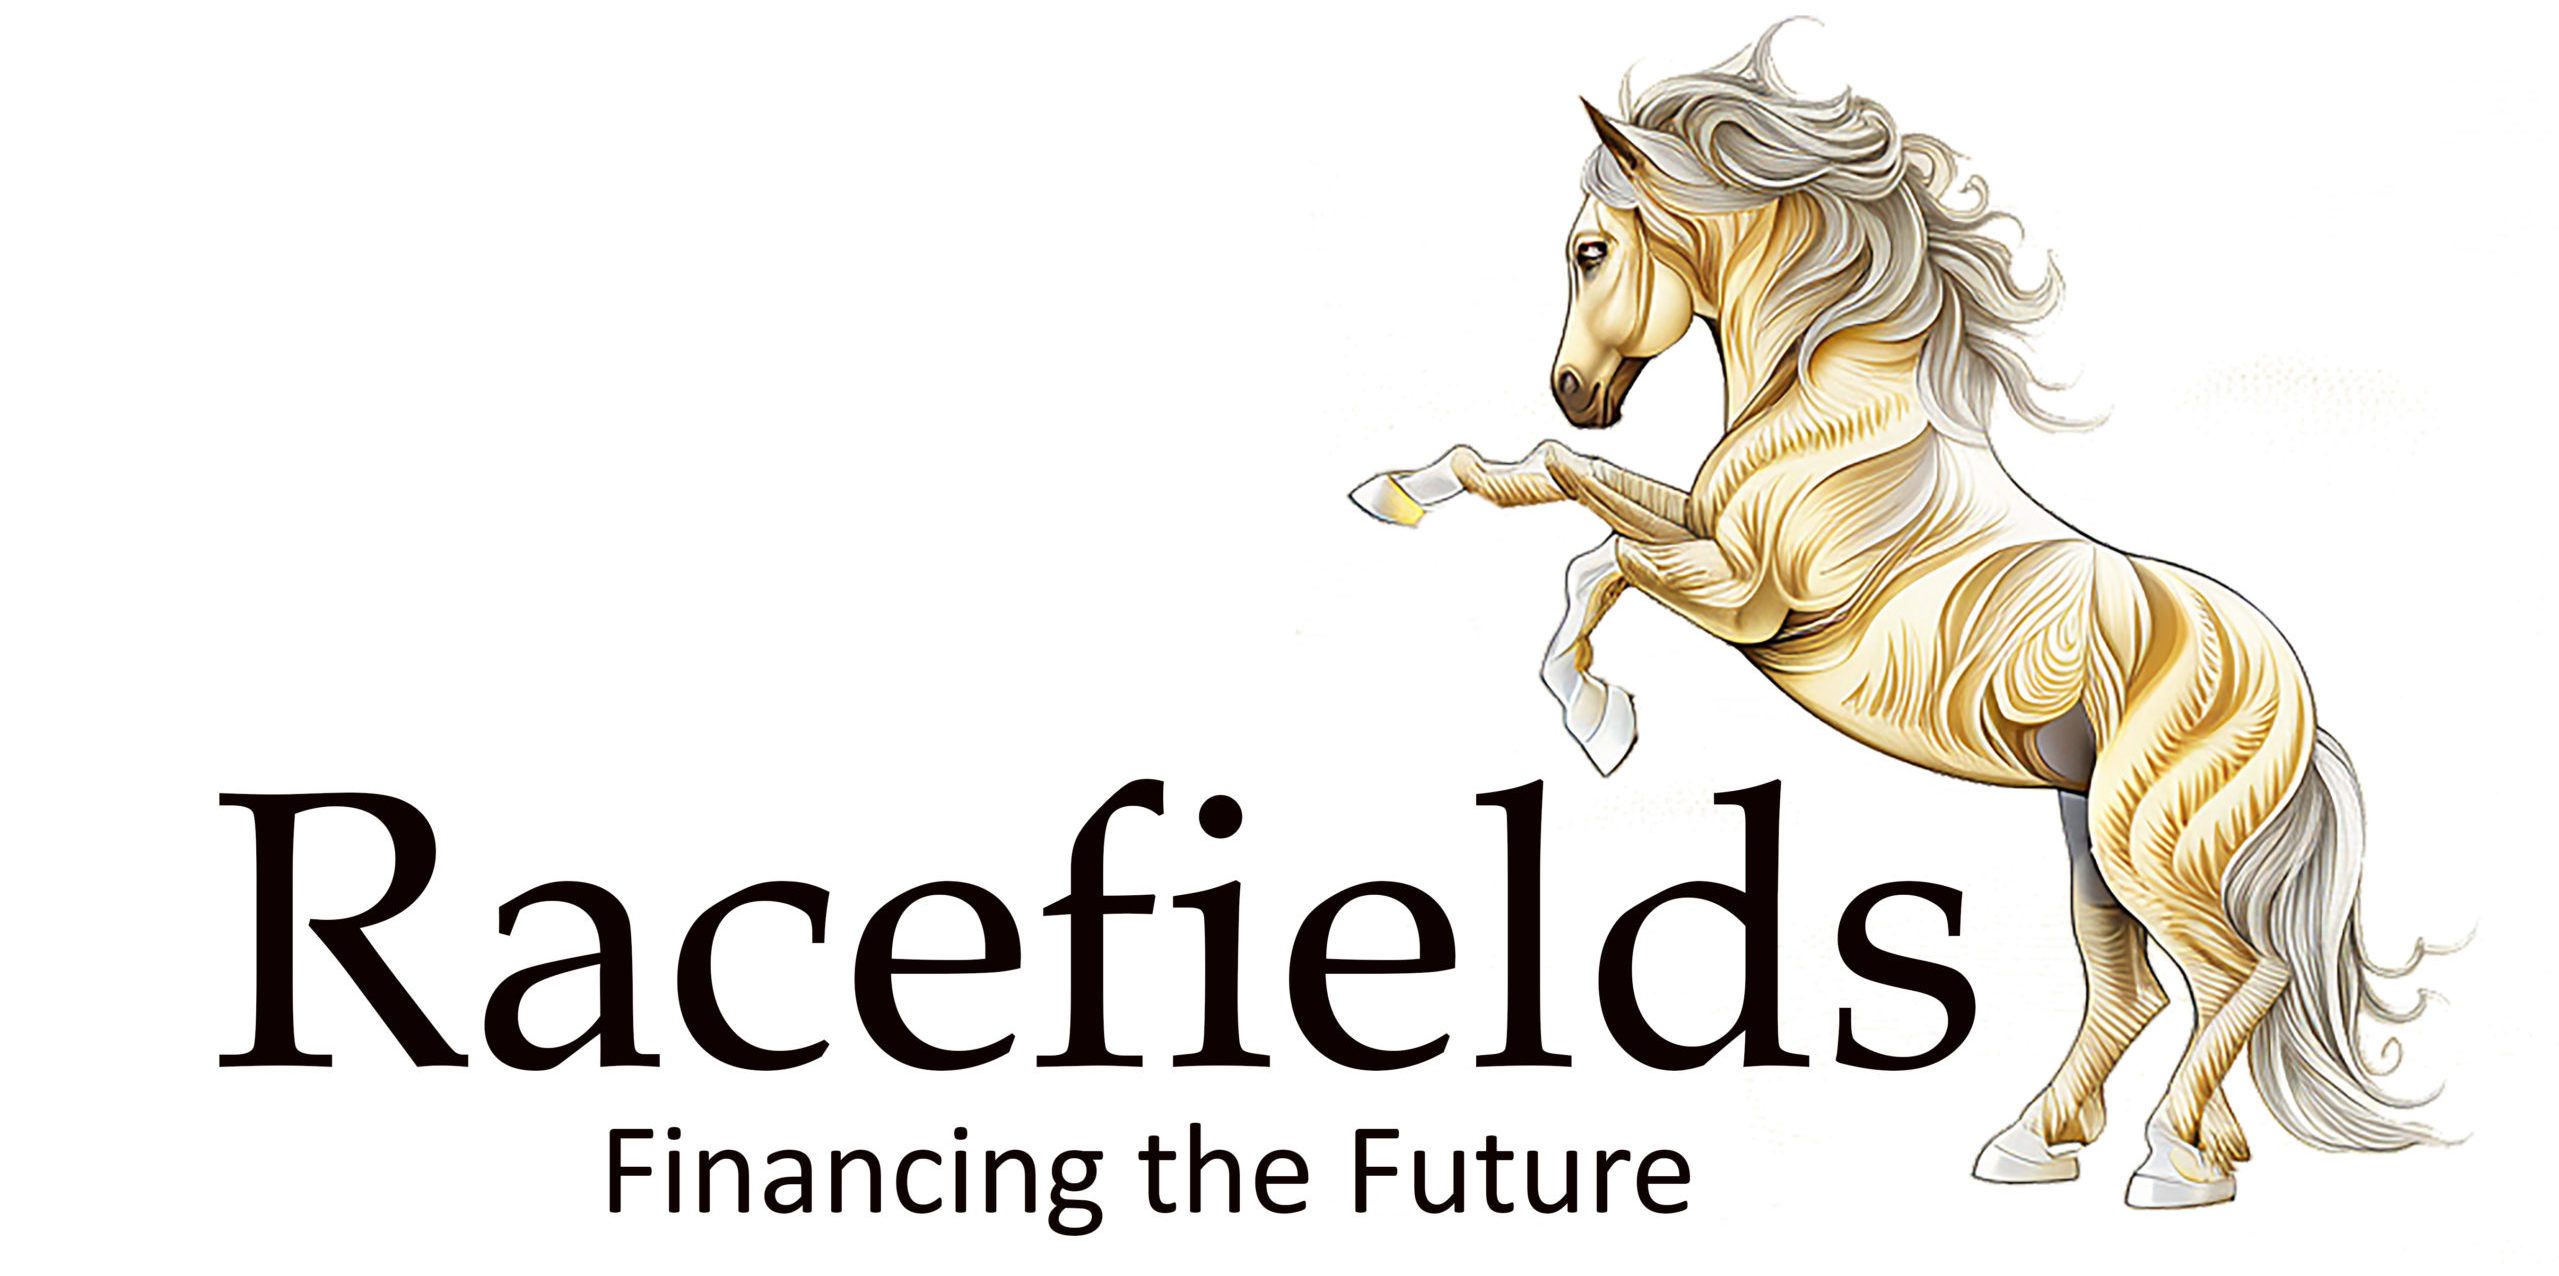 Racefields – Financing the Future